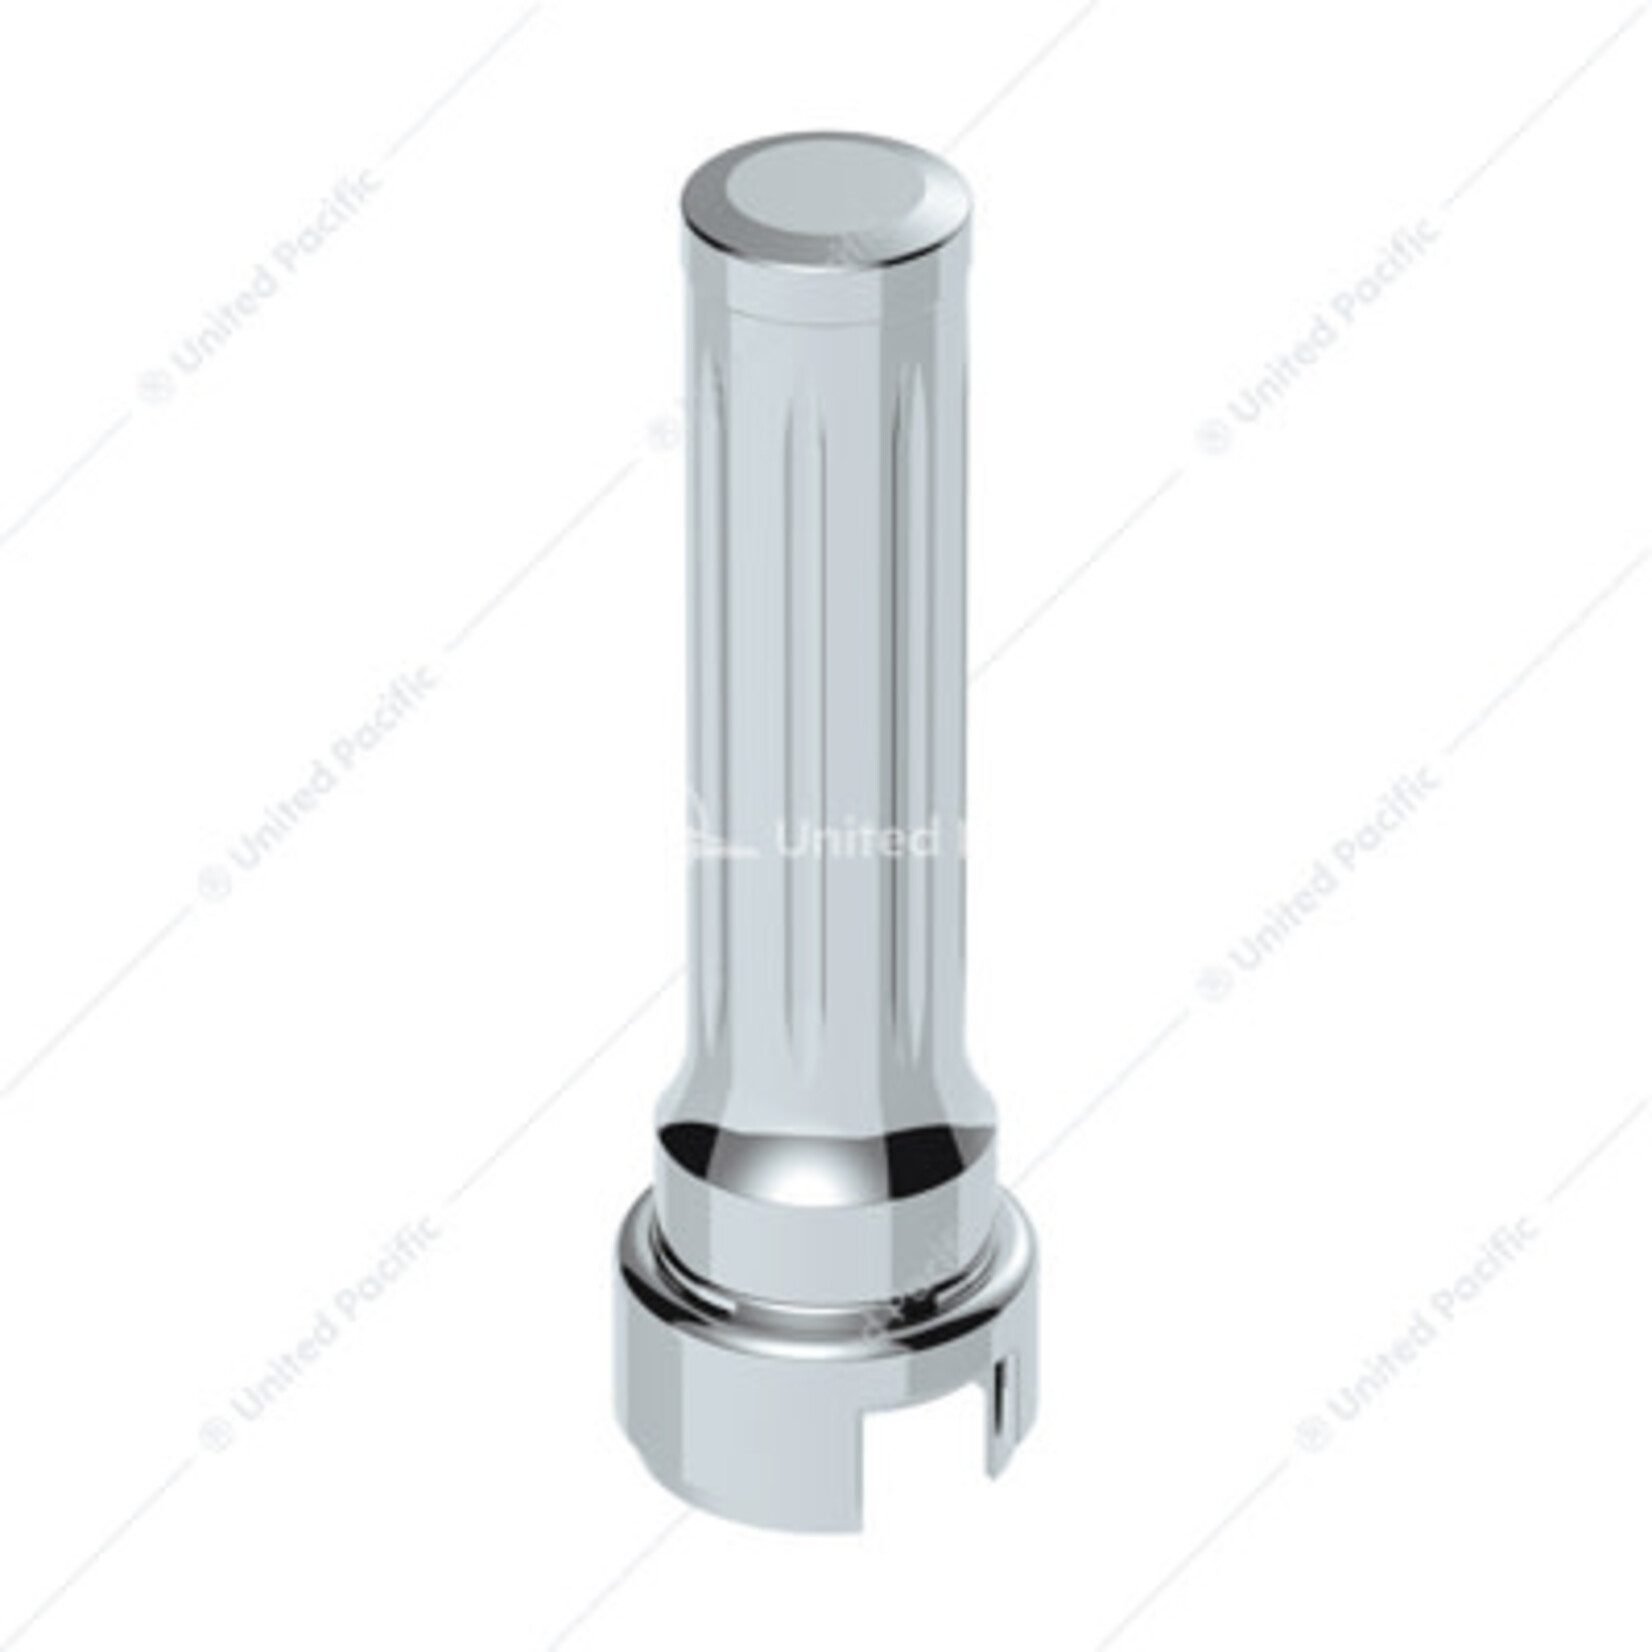 Thread-On Dallas Style Gearshift Knob With 13/15/18 Speed Adapter - Chrome/Vertical